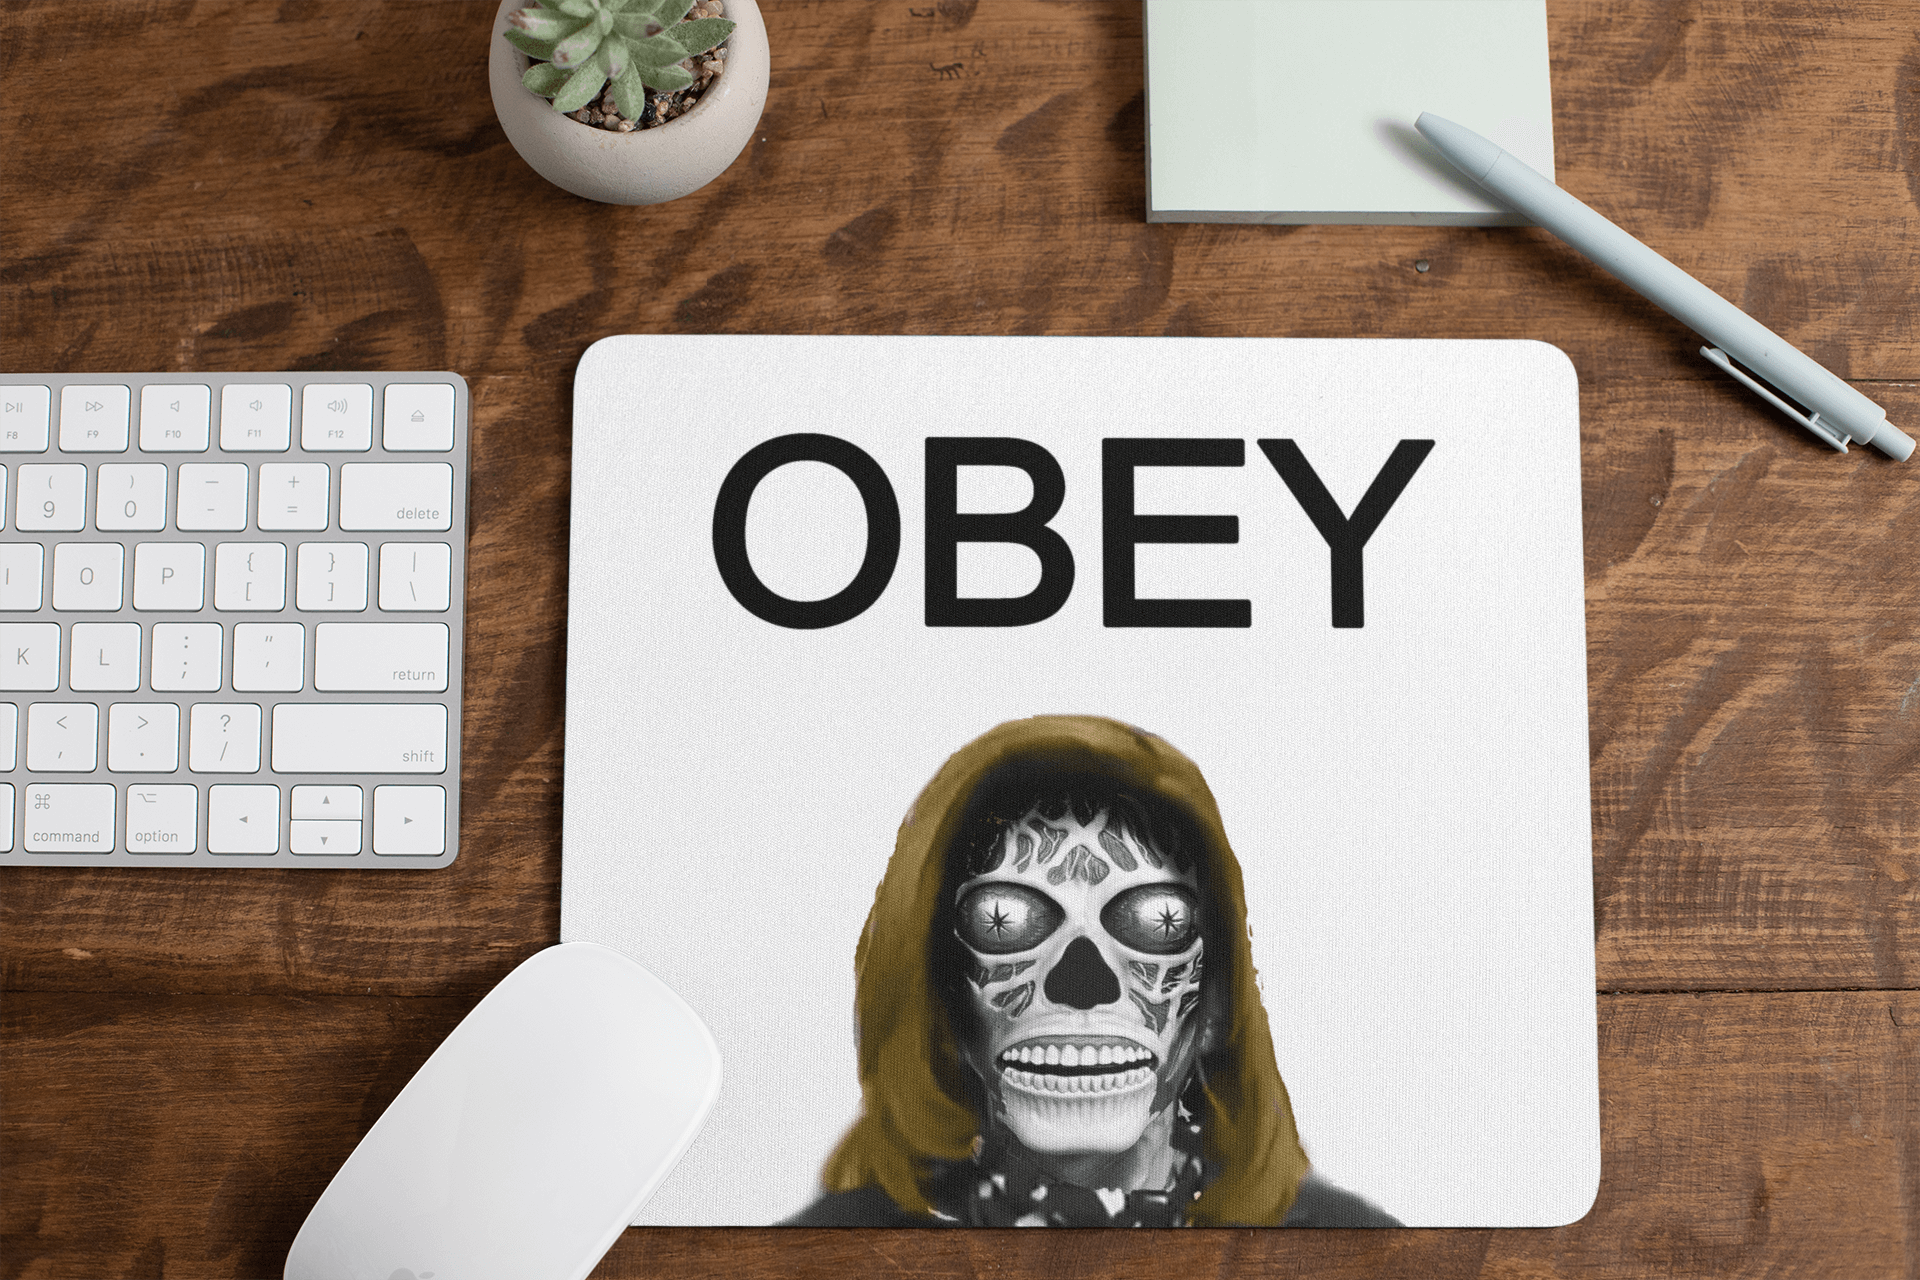 OBEY - Mouse pad CONSUME mouse pad Nancy Pelosi OBEY Pelosi They Live